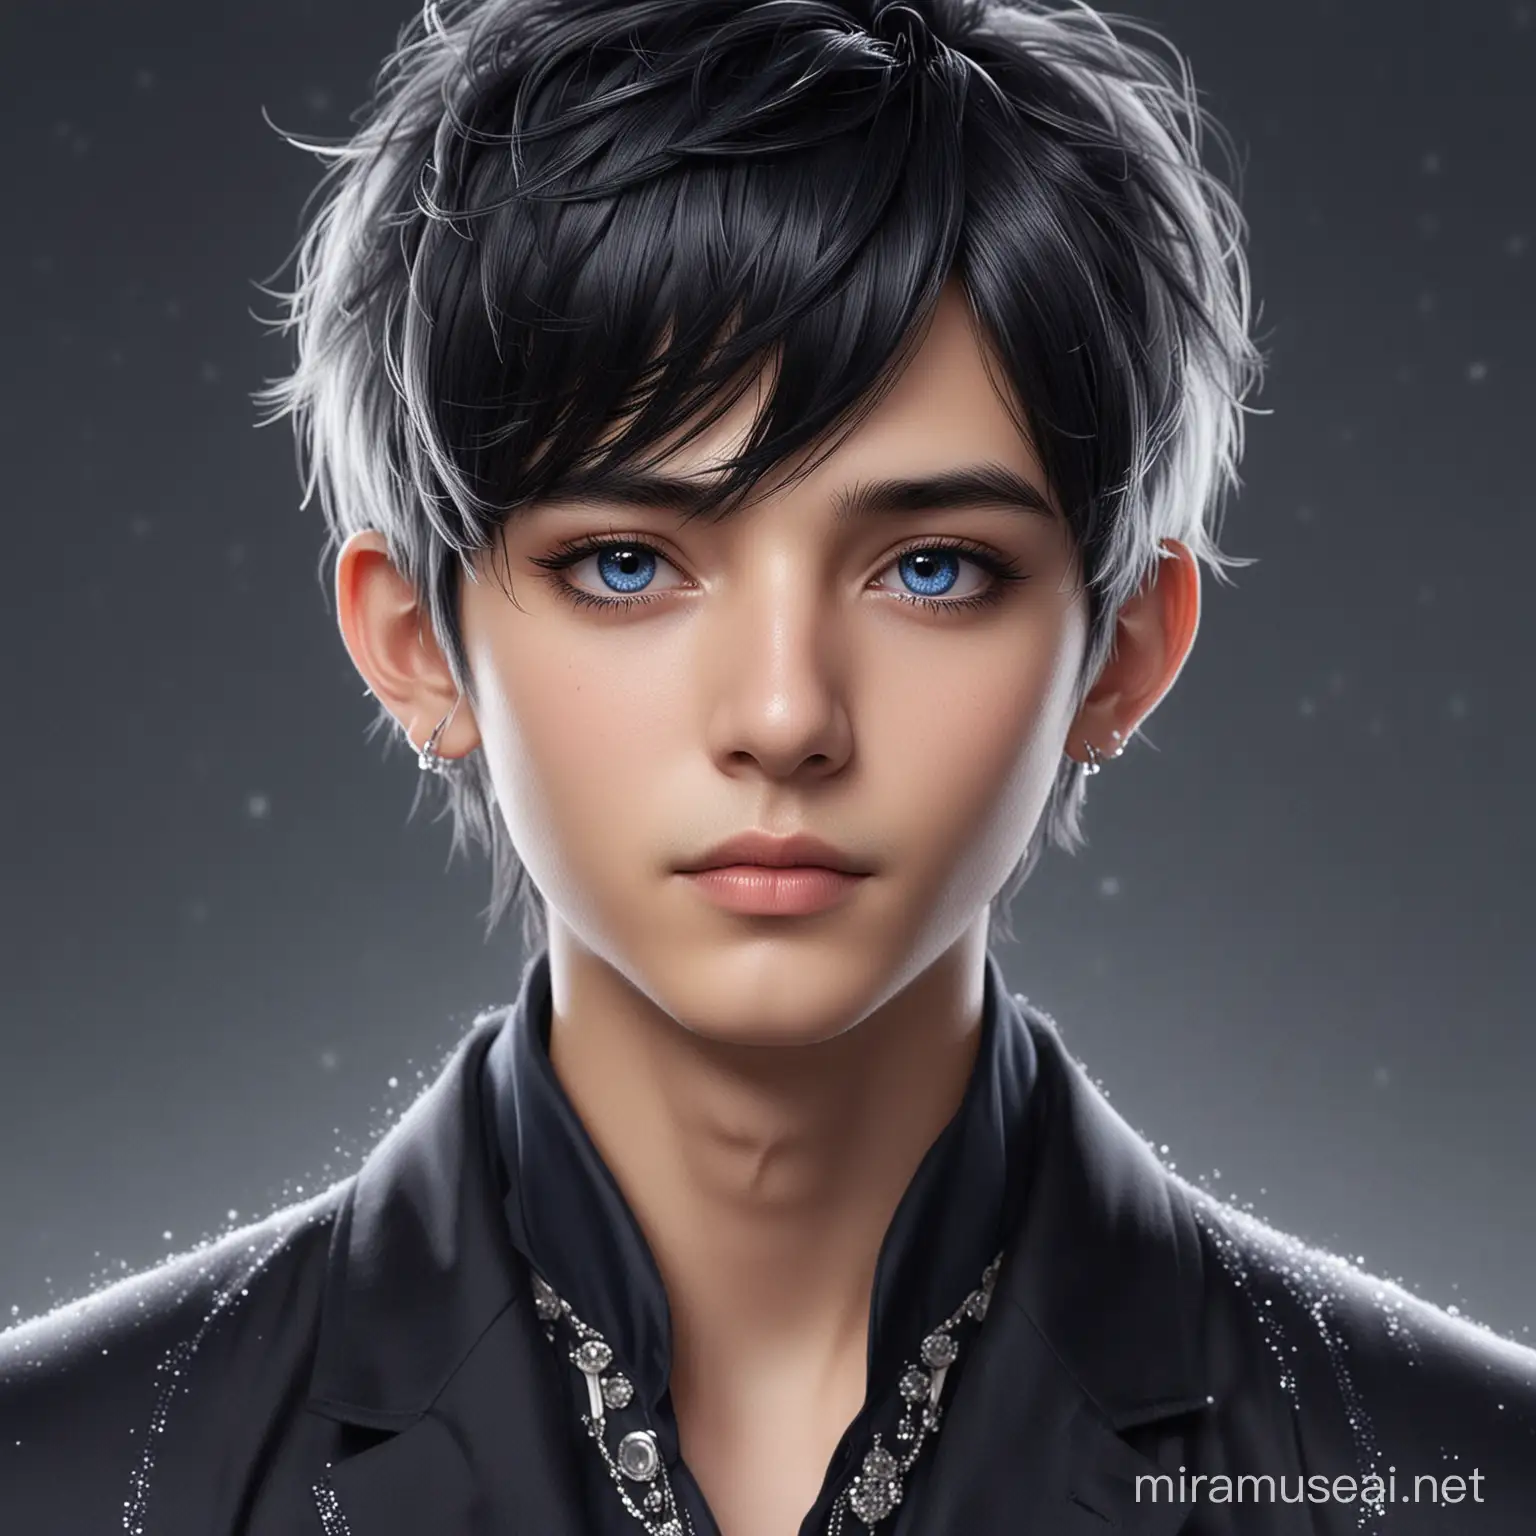 Stylish Boy with Flowing Black Hair and Sapphire Trinket Earrings